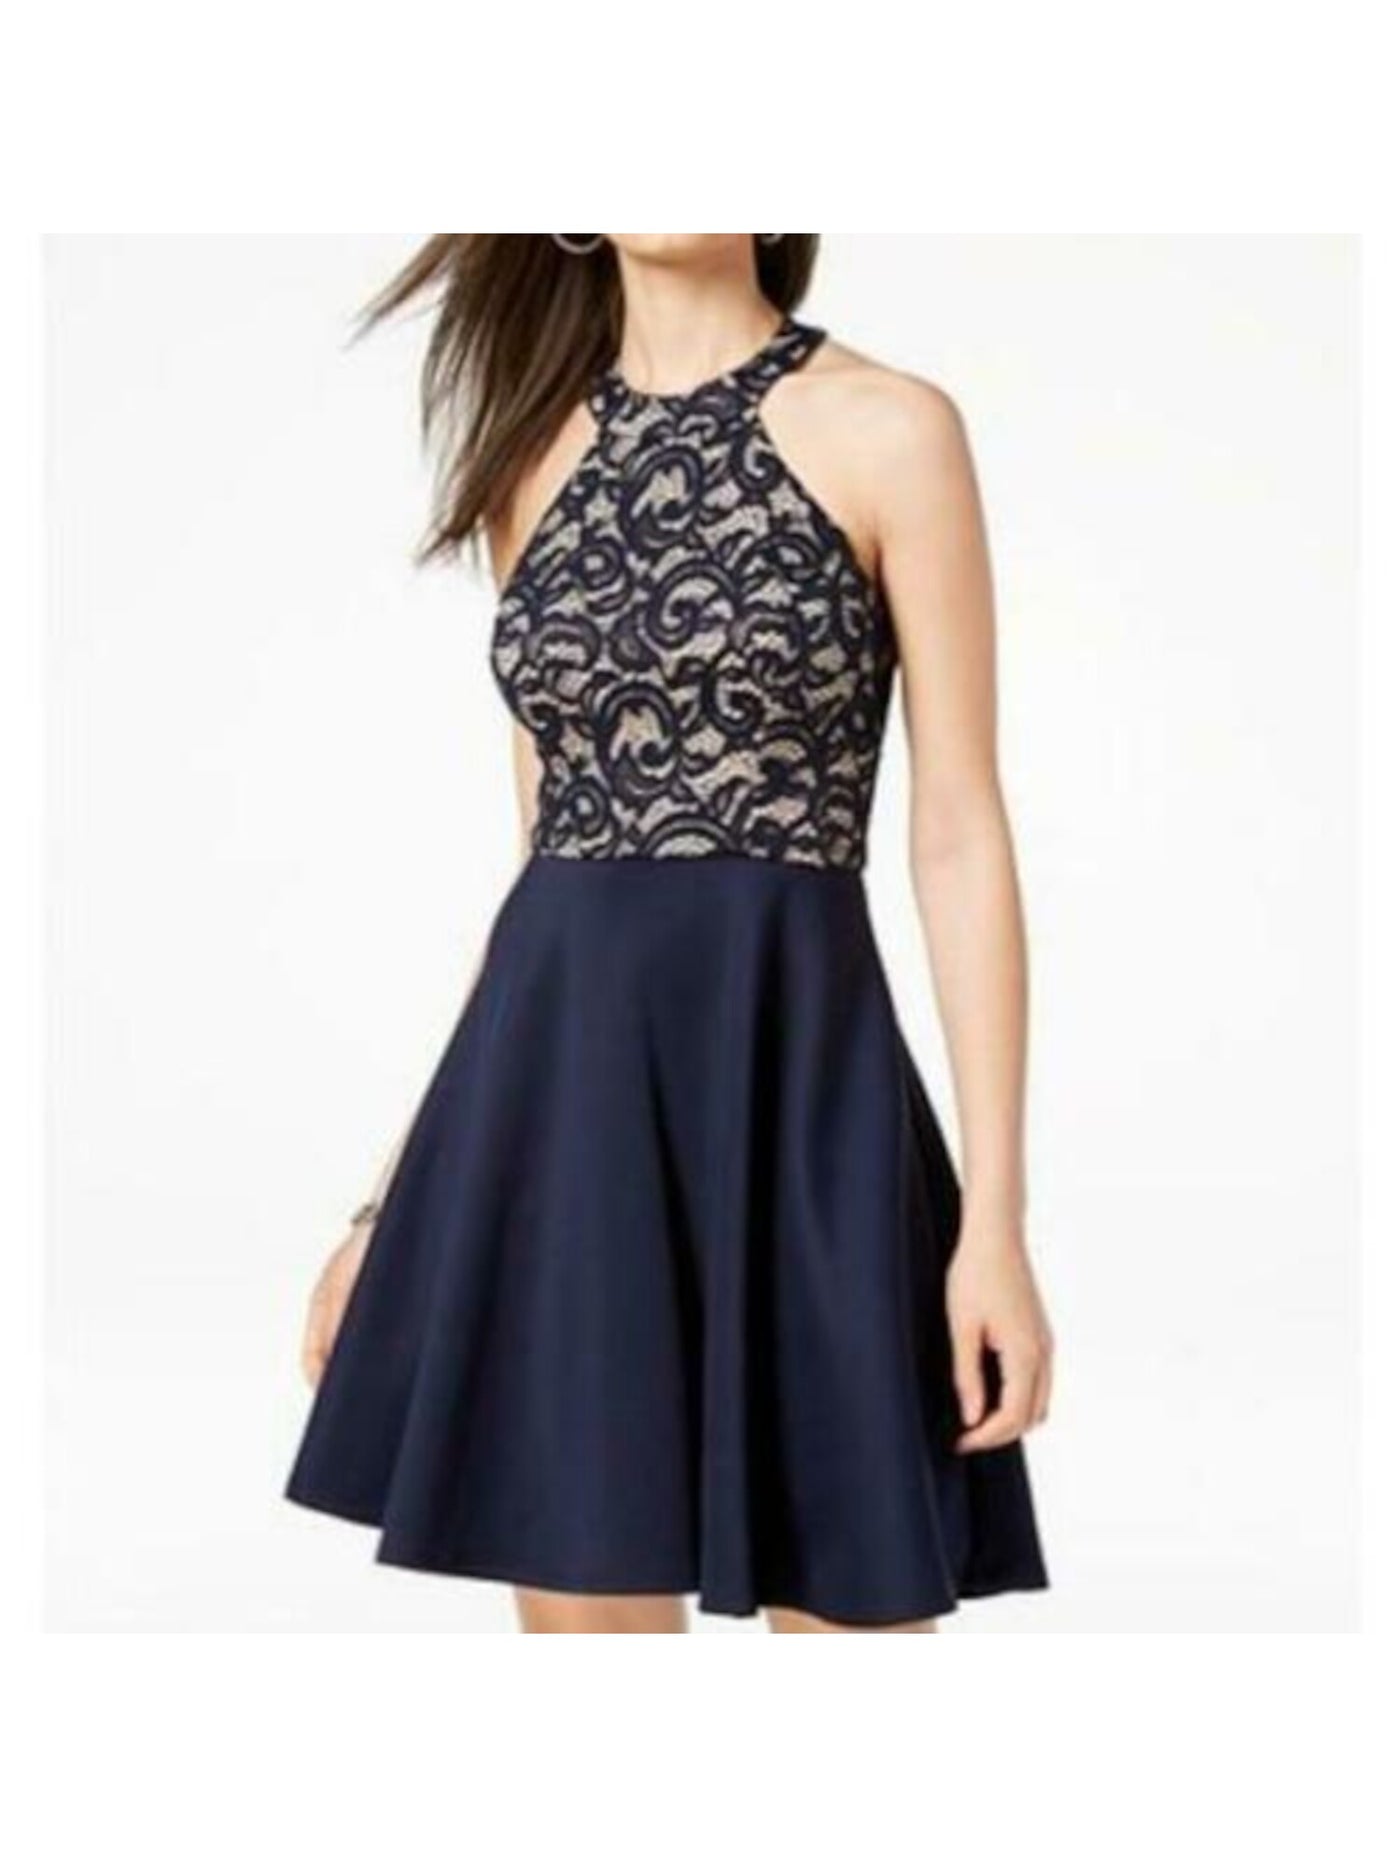 B DARLIN Womens Navy Lace Glitter Strappy Open Back Sleeveless Halter Short Party Fit + Flare Dress Juniors 1\2